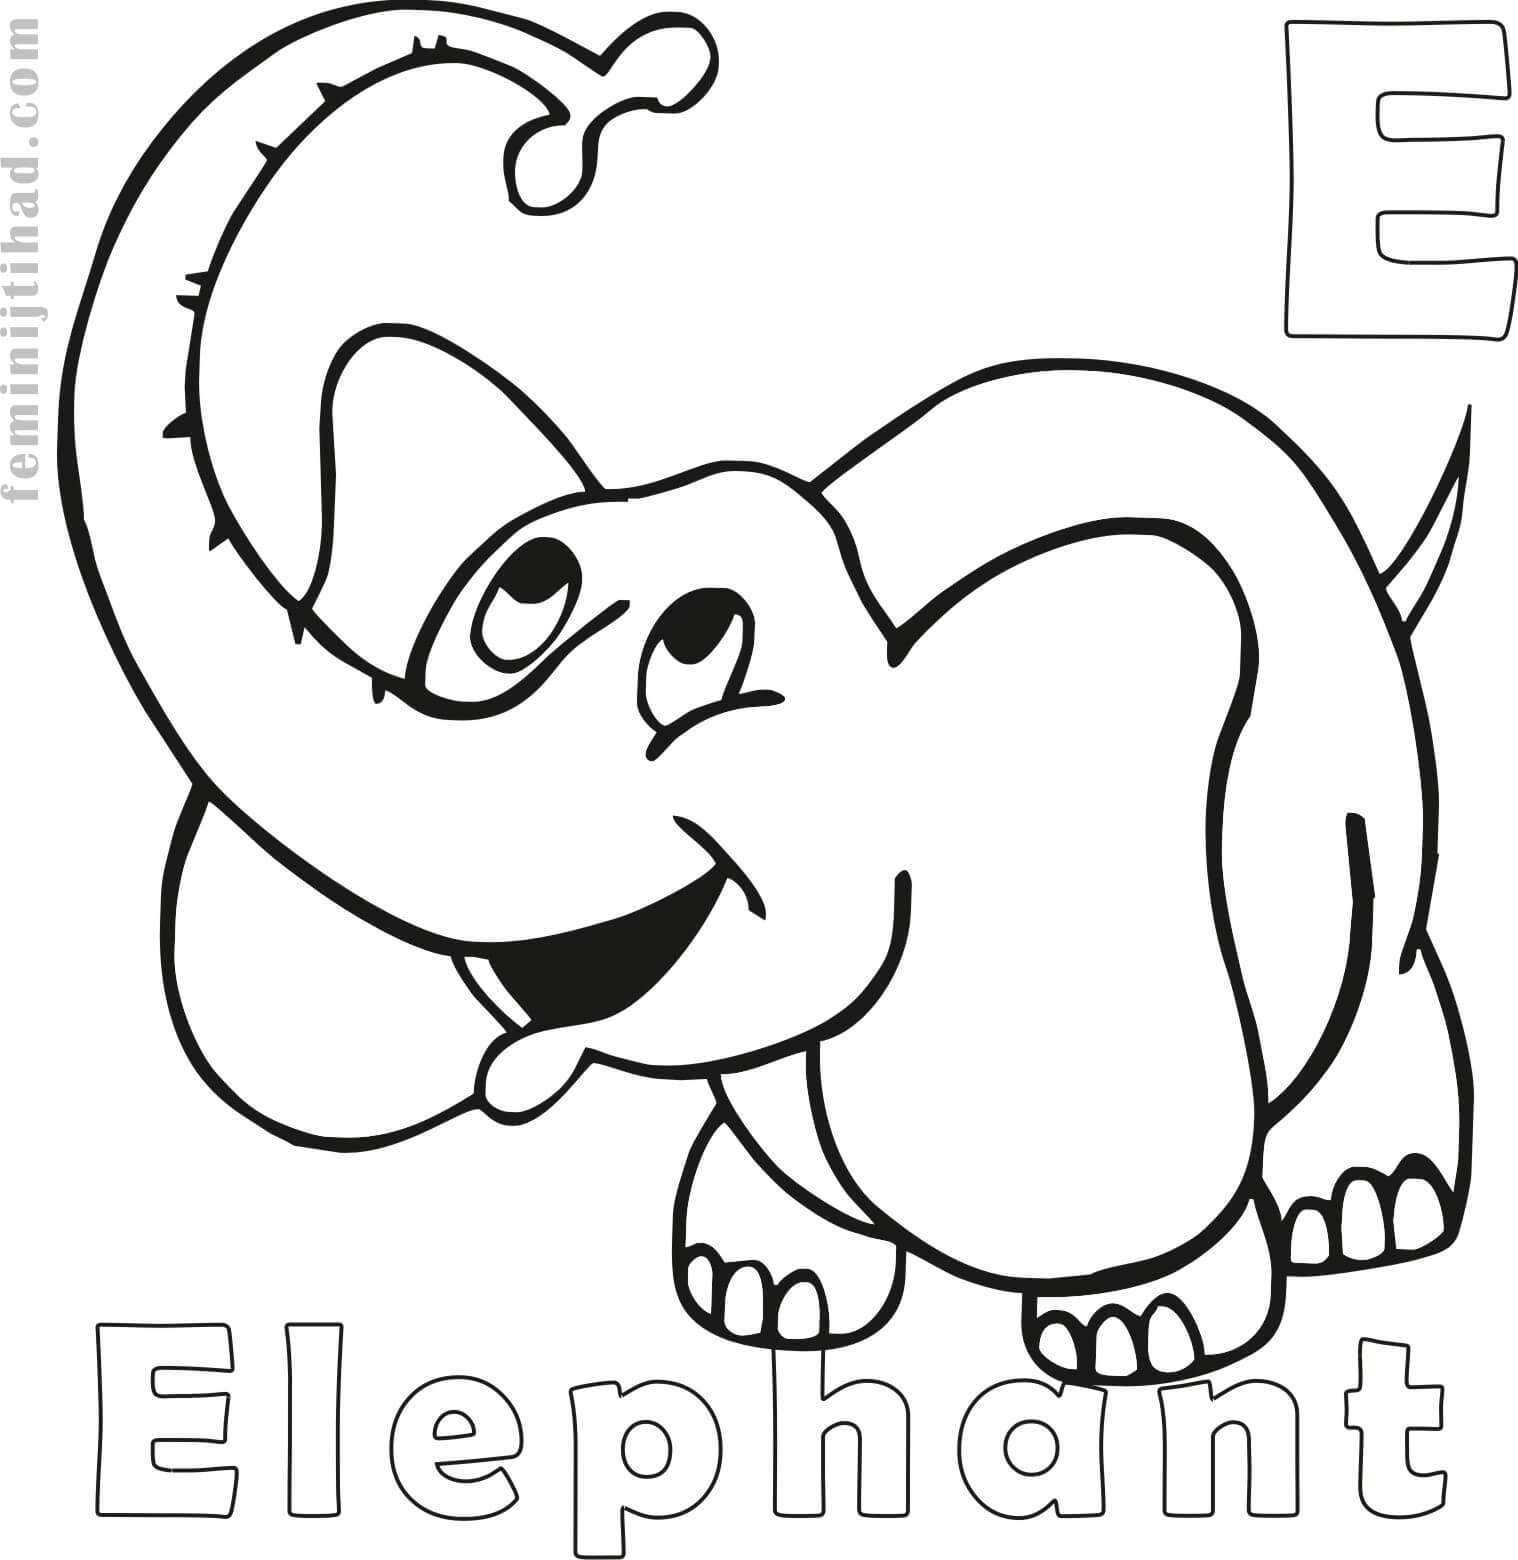 e is for elephant coloring page